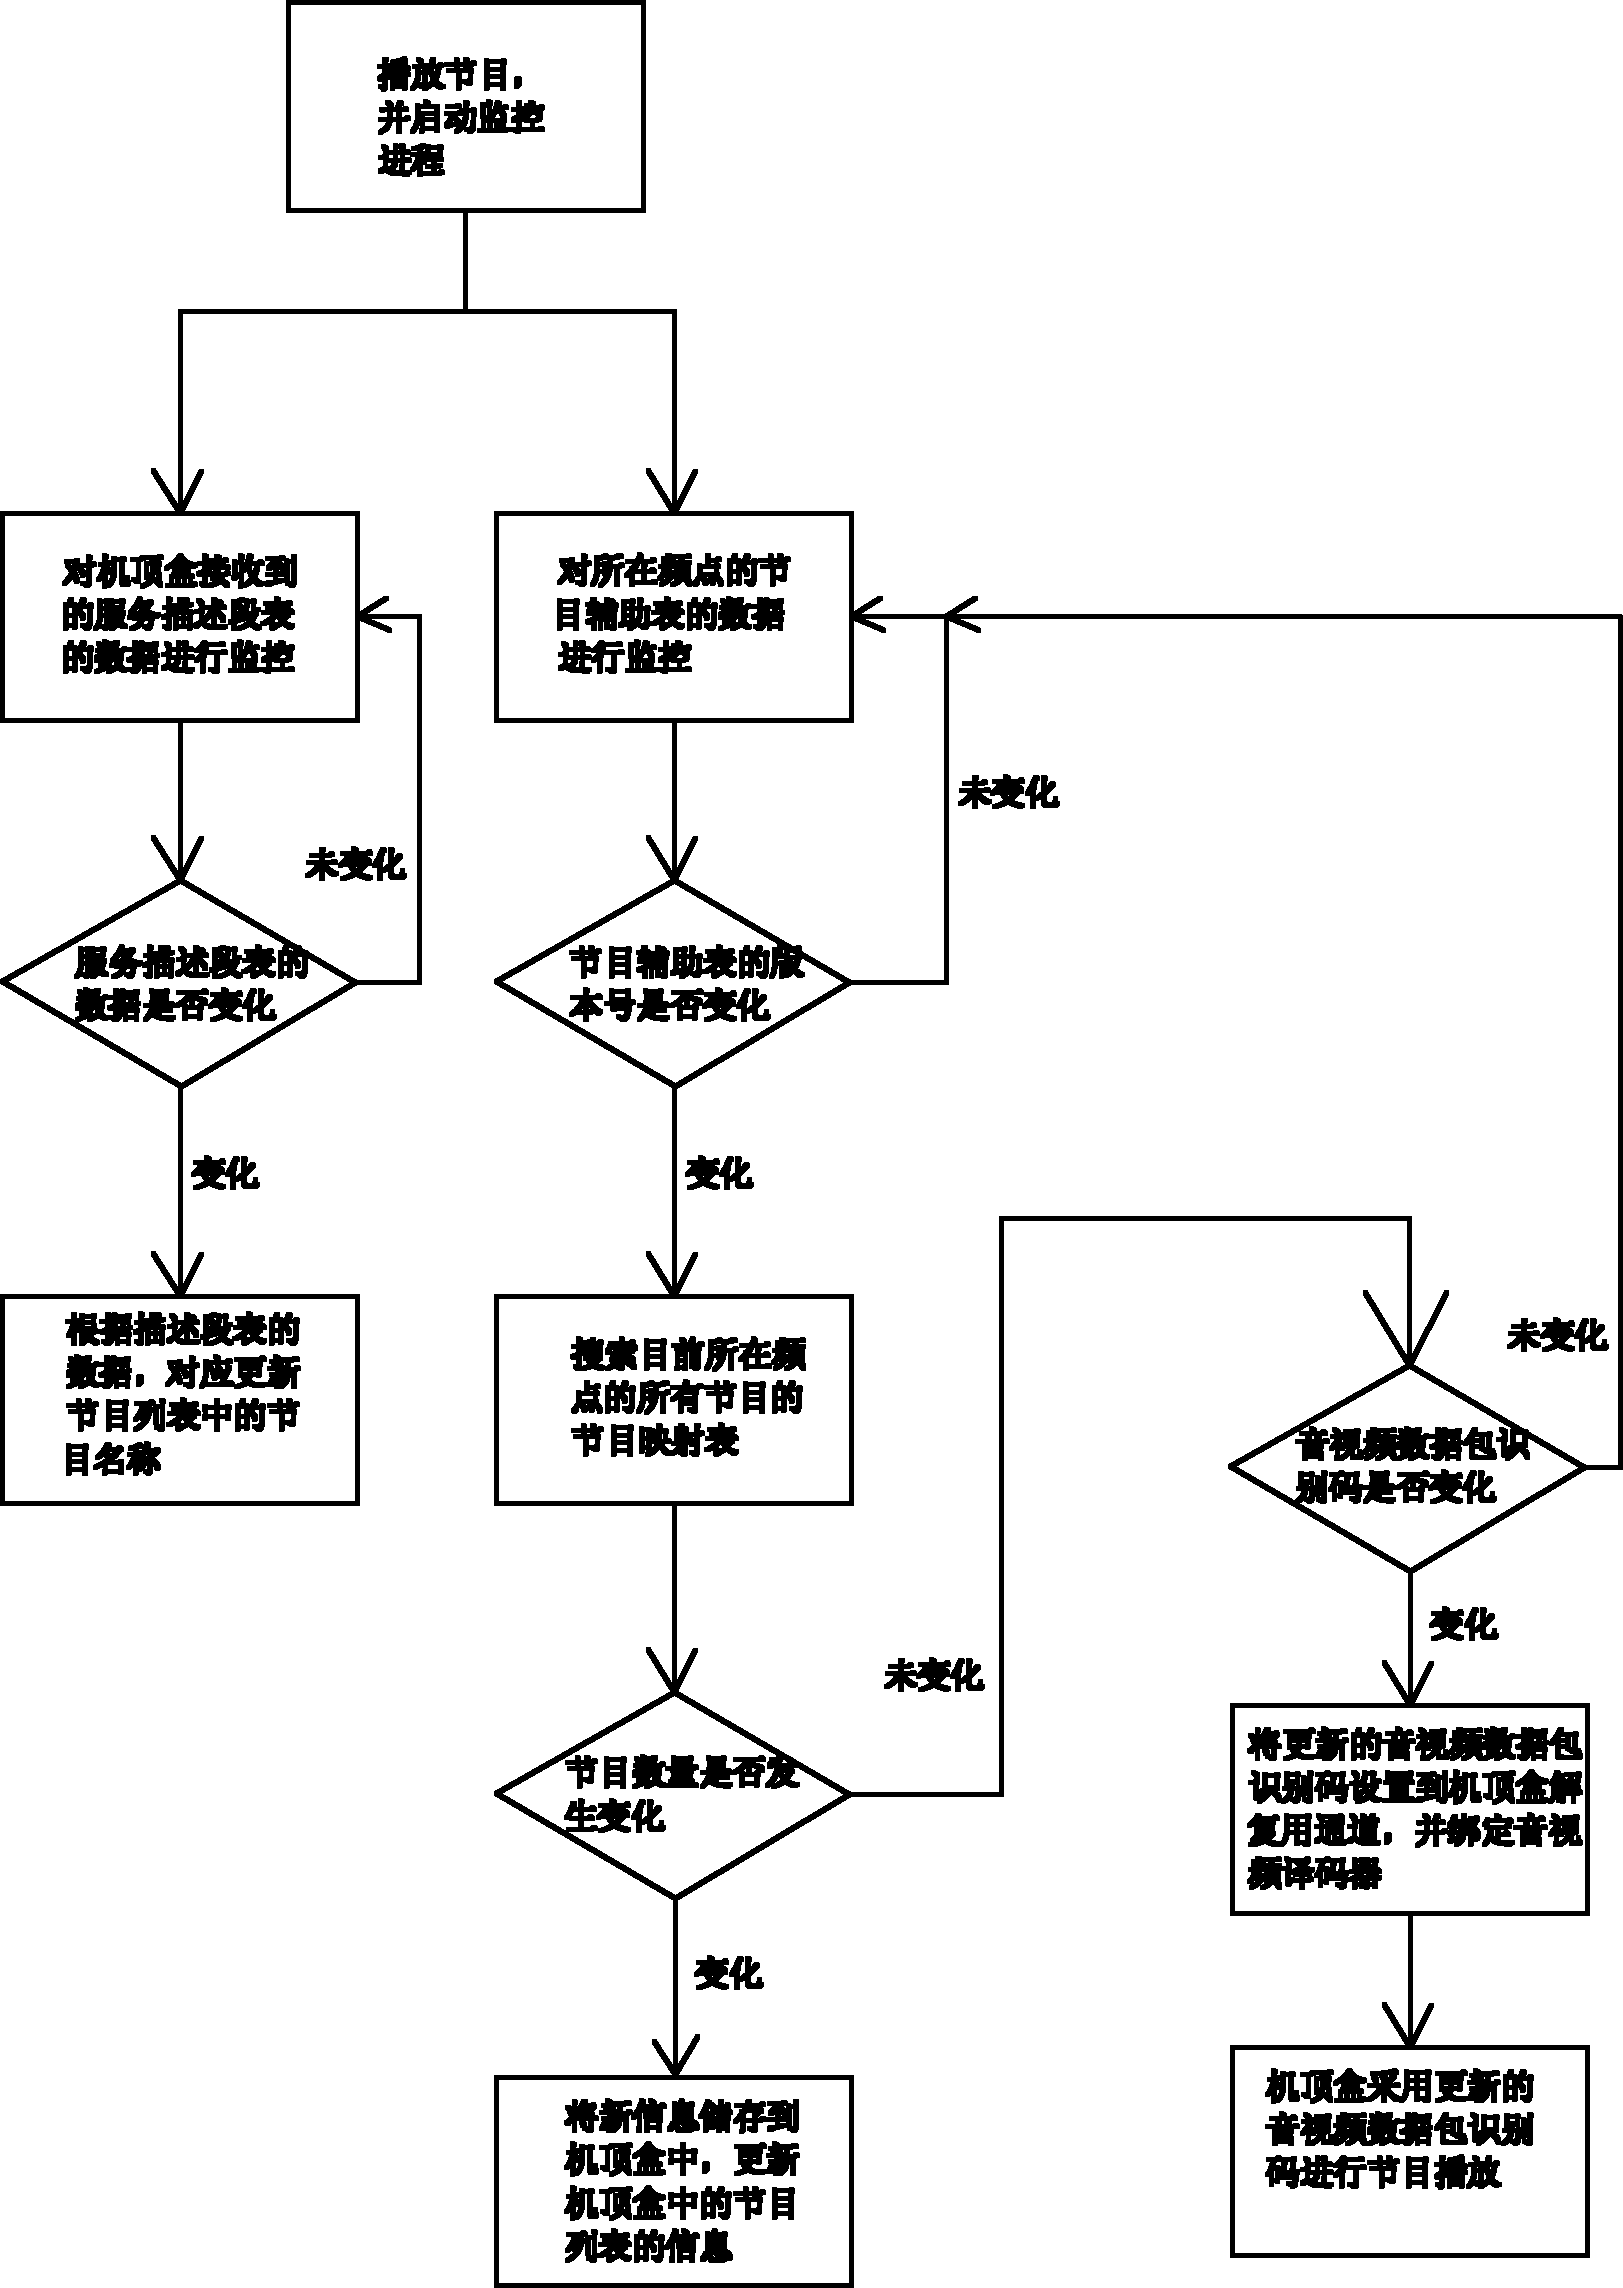 Method for automatically updating data in real time by a set top box